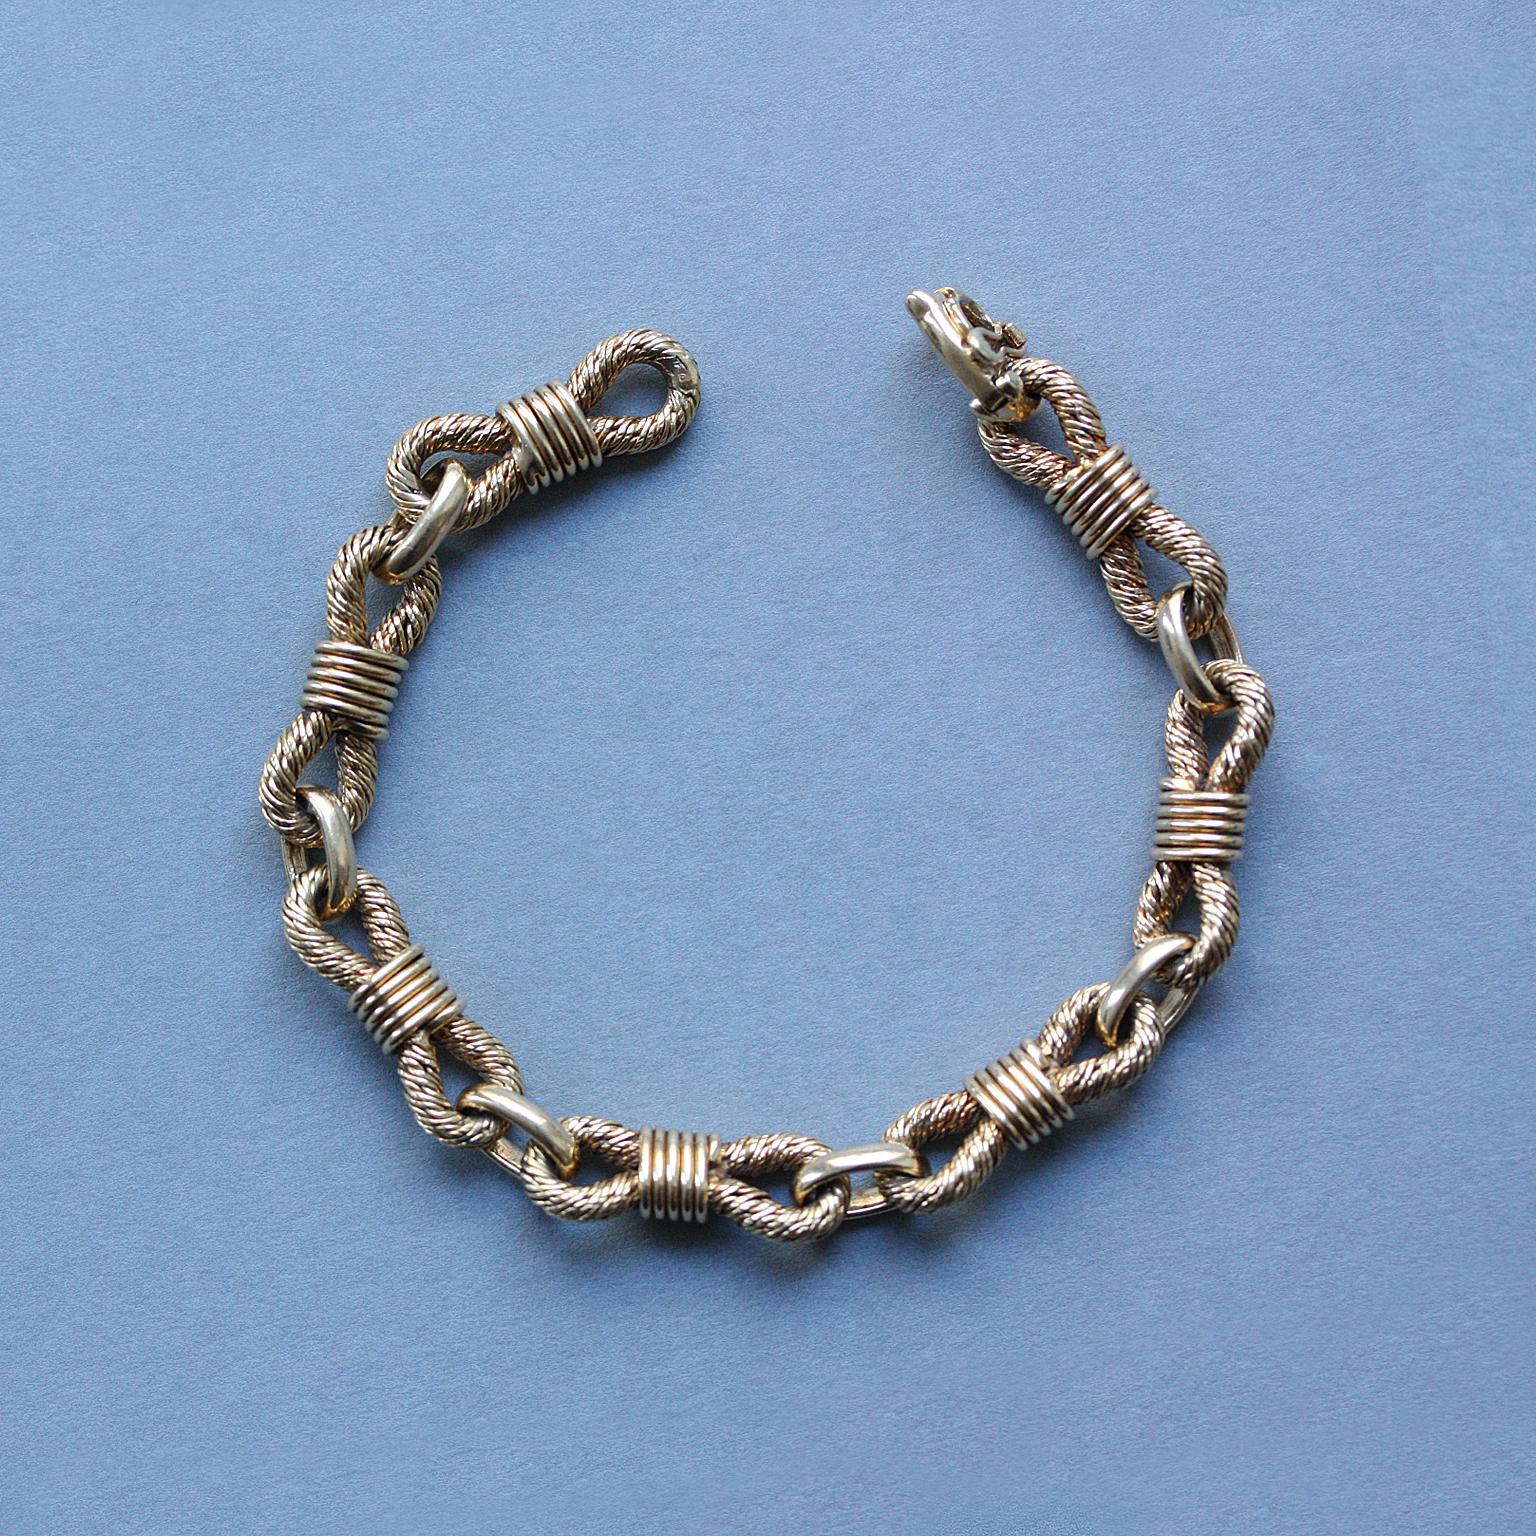 A yellow 18 carat gold link bracelet by Lenfant who is considered to be ‘le maître de la chaîne’. Every link is made in the classic Lenfant braided rope like texture and the links are bound together in the middle by a gold a band of gold wire. The